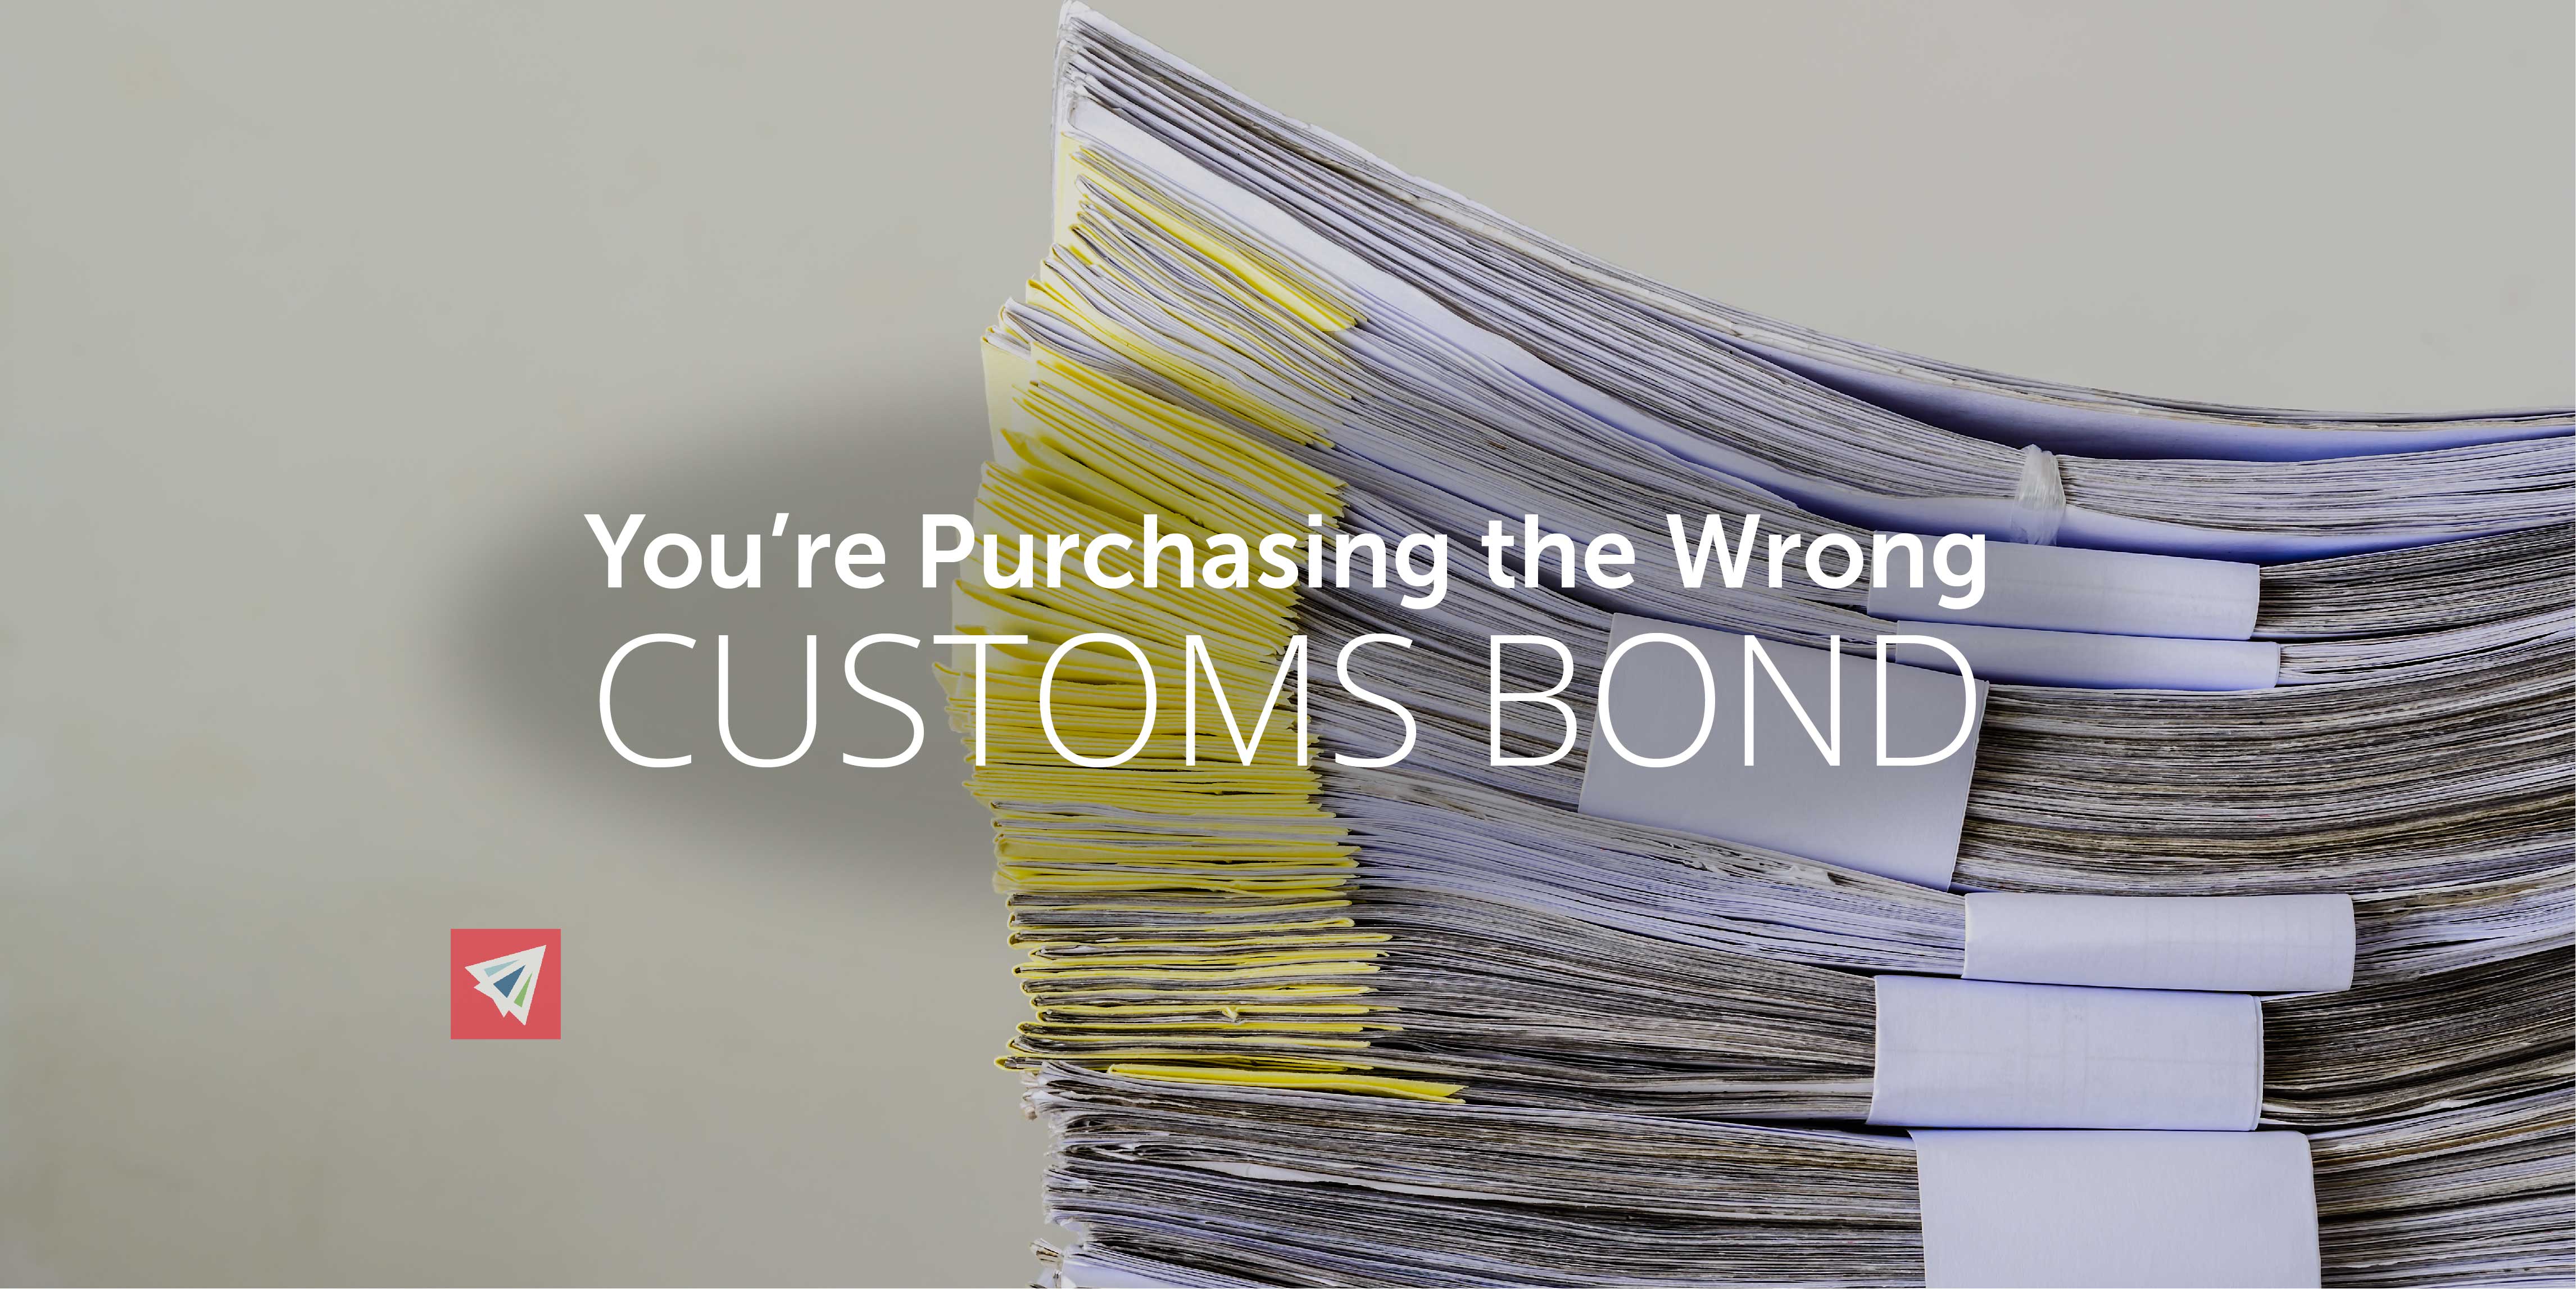 Youre Purchasing the Wrong Customs Bond